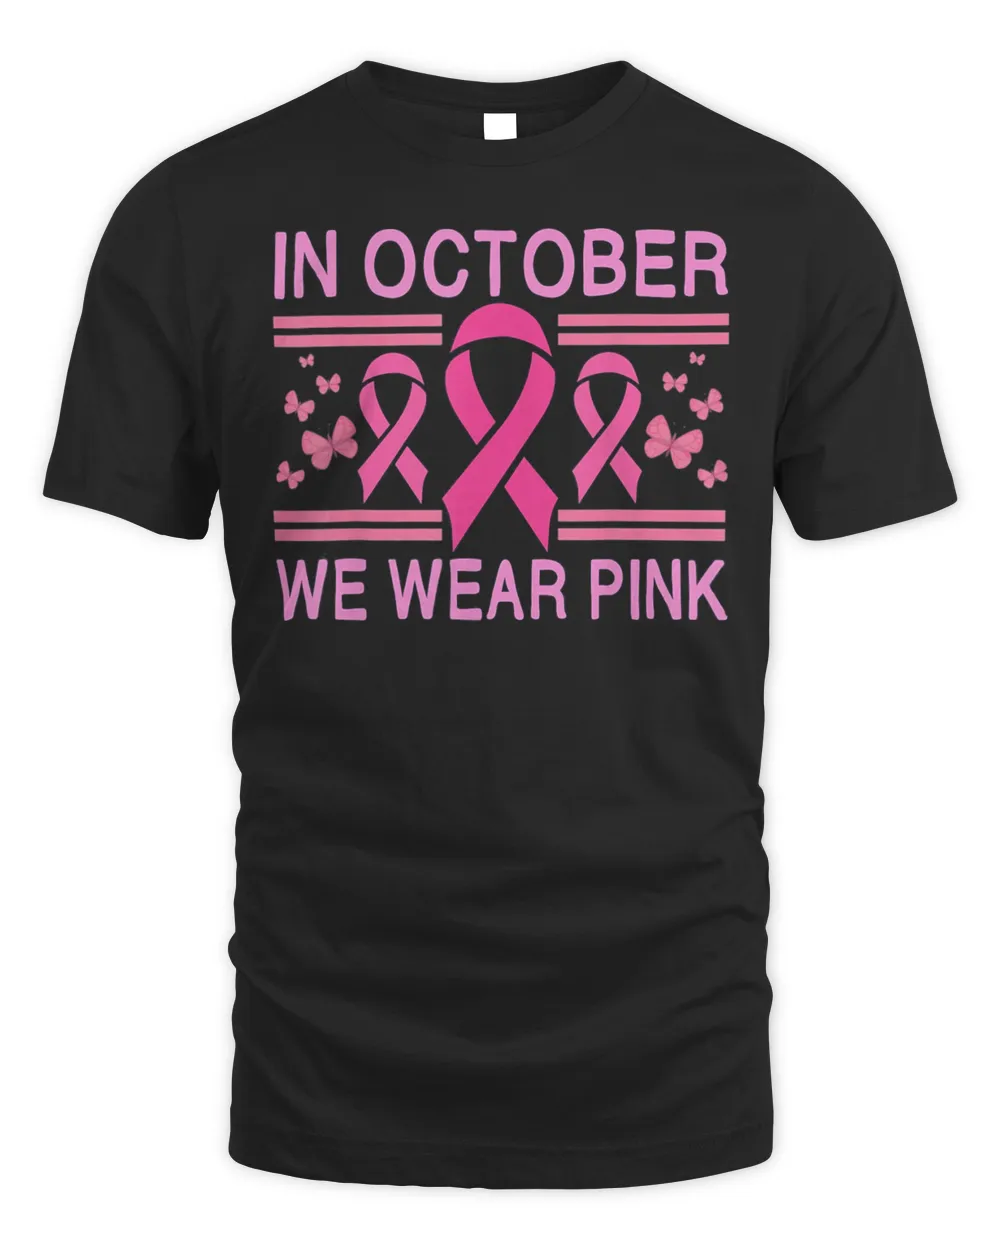 In October We Wear Pink Butterfly Pink Ribbon Awareness T-Shirt